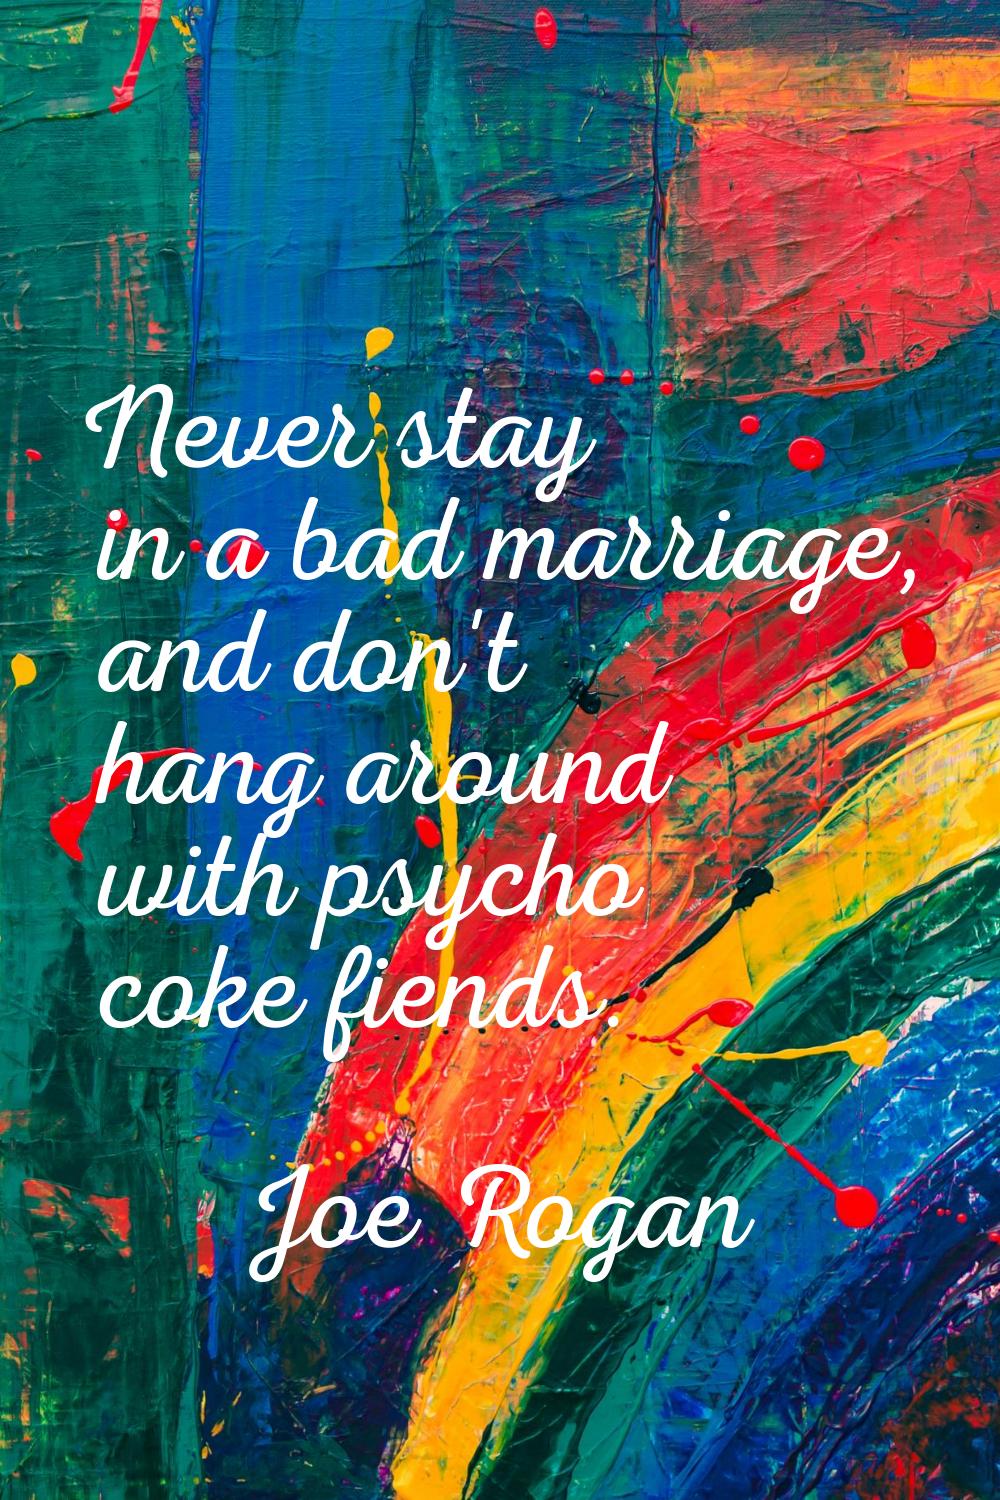 Never stay in a bad marriage, and don't hang around with psycho coke fiends.